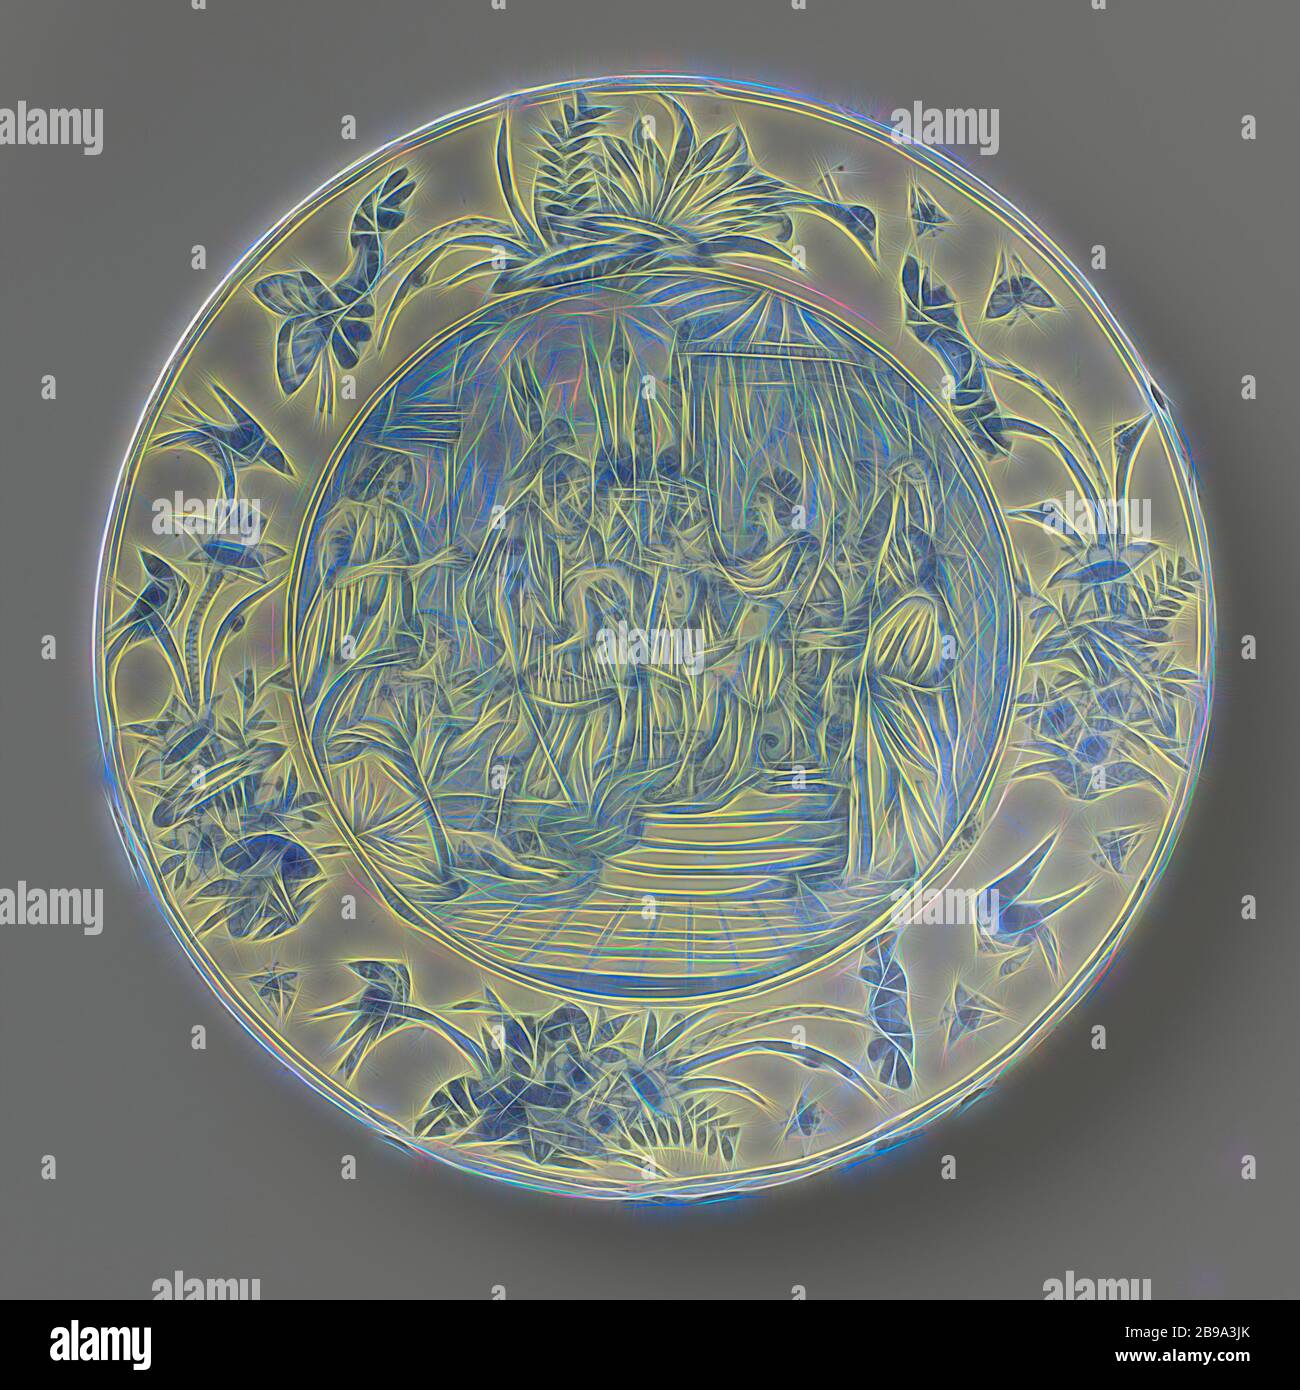 Saucer, painted with the judgment of King Solomon, Saucer of faience, painted blue in the glaze. On the shelf a representation of the Judgment of King Solomon. On the border flowers, butterflies and birds after a Chinese example, the judgment of Solomon (1 Kings 3: 16-28), Willem Jansz. Verstraeten (attributed to workshop of), Haarlem, c. 1655 - c. 1660, h 6.5 cm × d 38.7 cm, Reimagined by Gibon, design of warm cheerful glowing of brightness and light rays radiance. Classic art reinvented with a modern twist. Photography inspired by futurism, embracing dynamic energy of modern technology, move Stock Photo